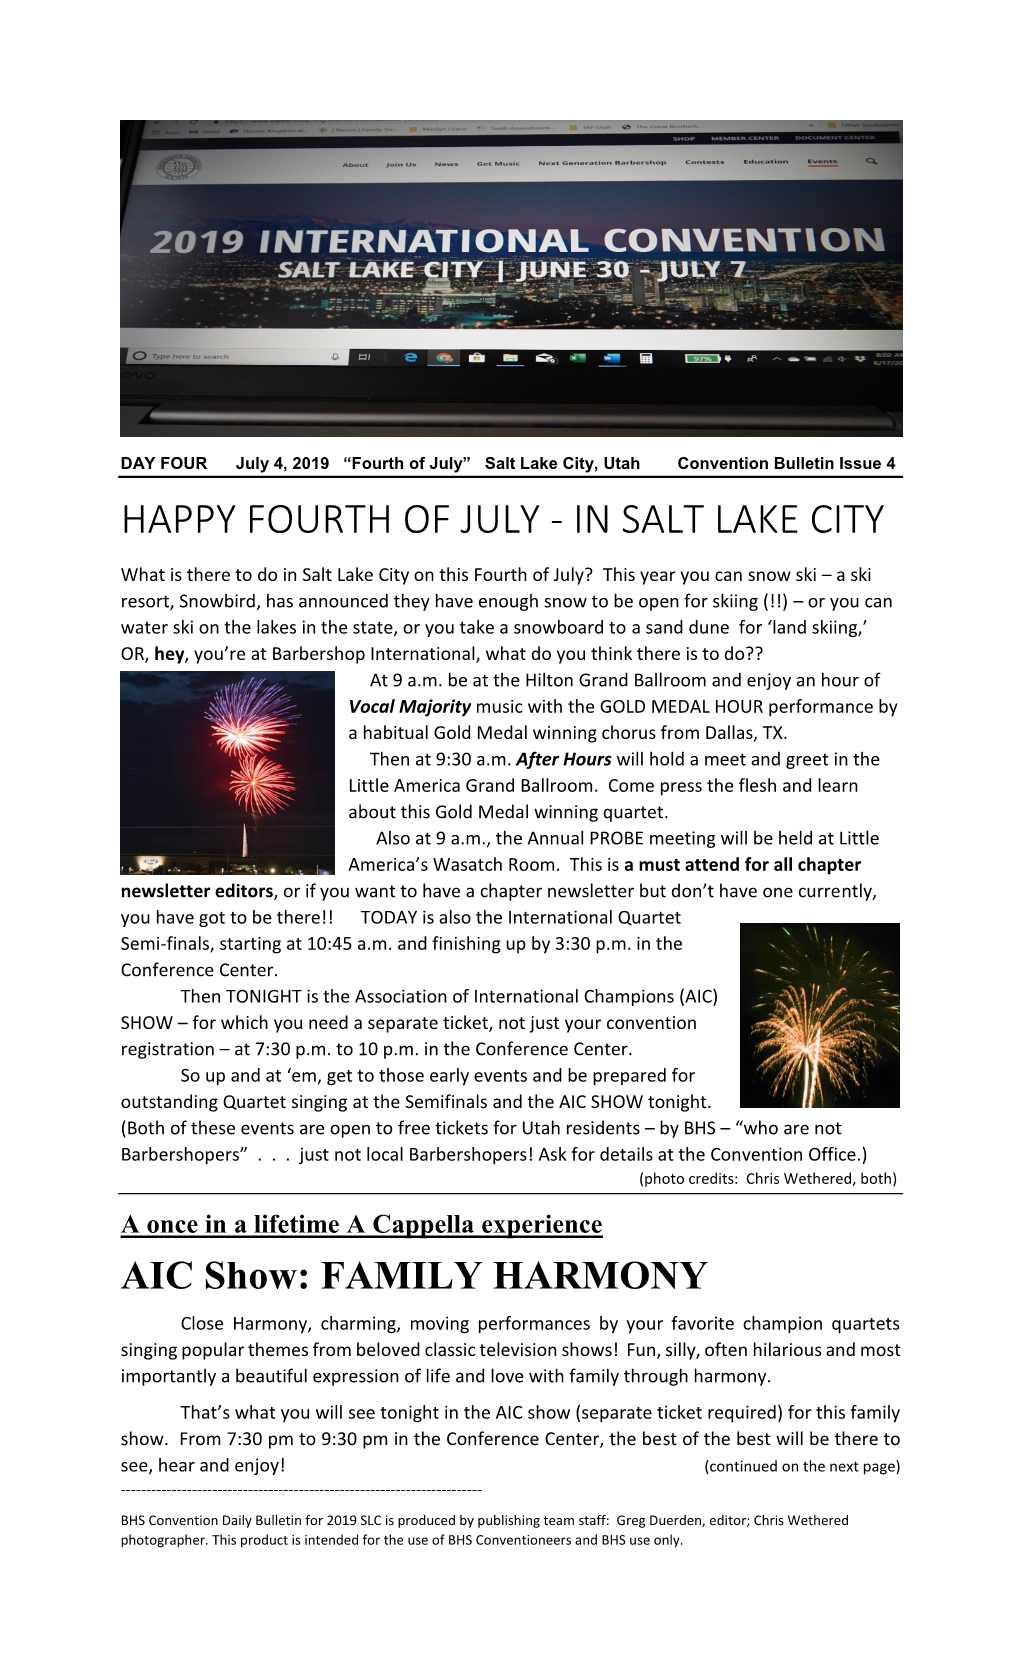 Happy Fourth of July - in Salt Lake City